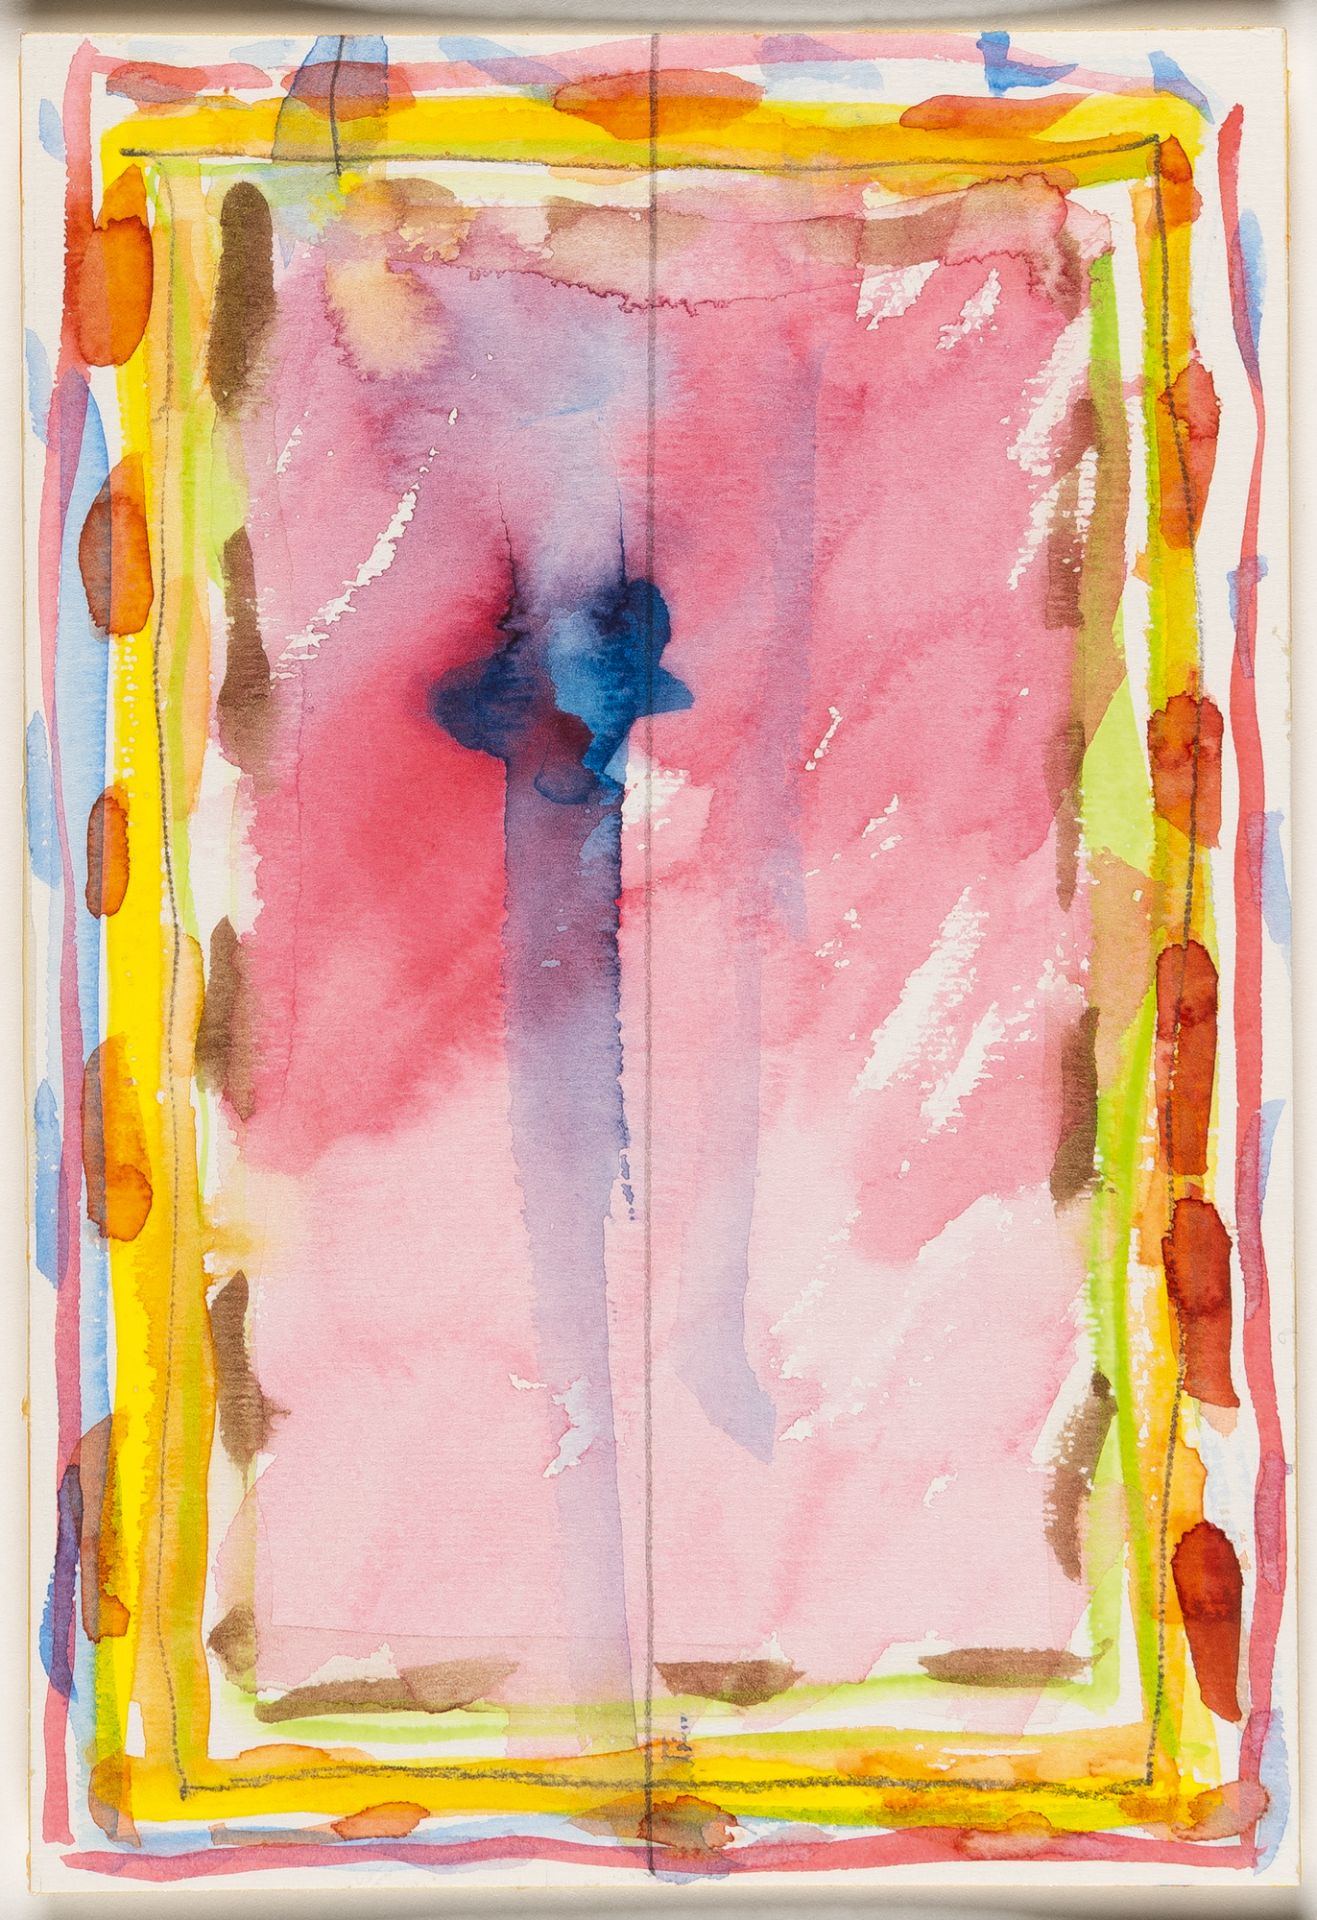 Richard Tuttle (1941 Rahway/New Jersey) – „Valencia Frames“.Watercolour on fine cardboard. 1992. ca. - Image 2 of 3